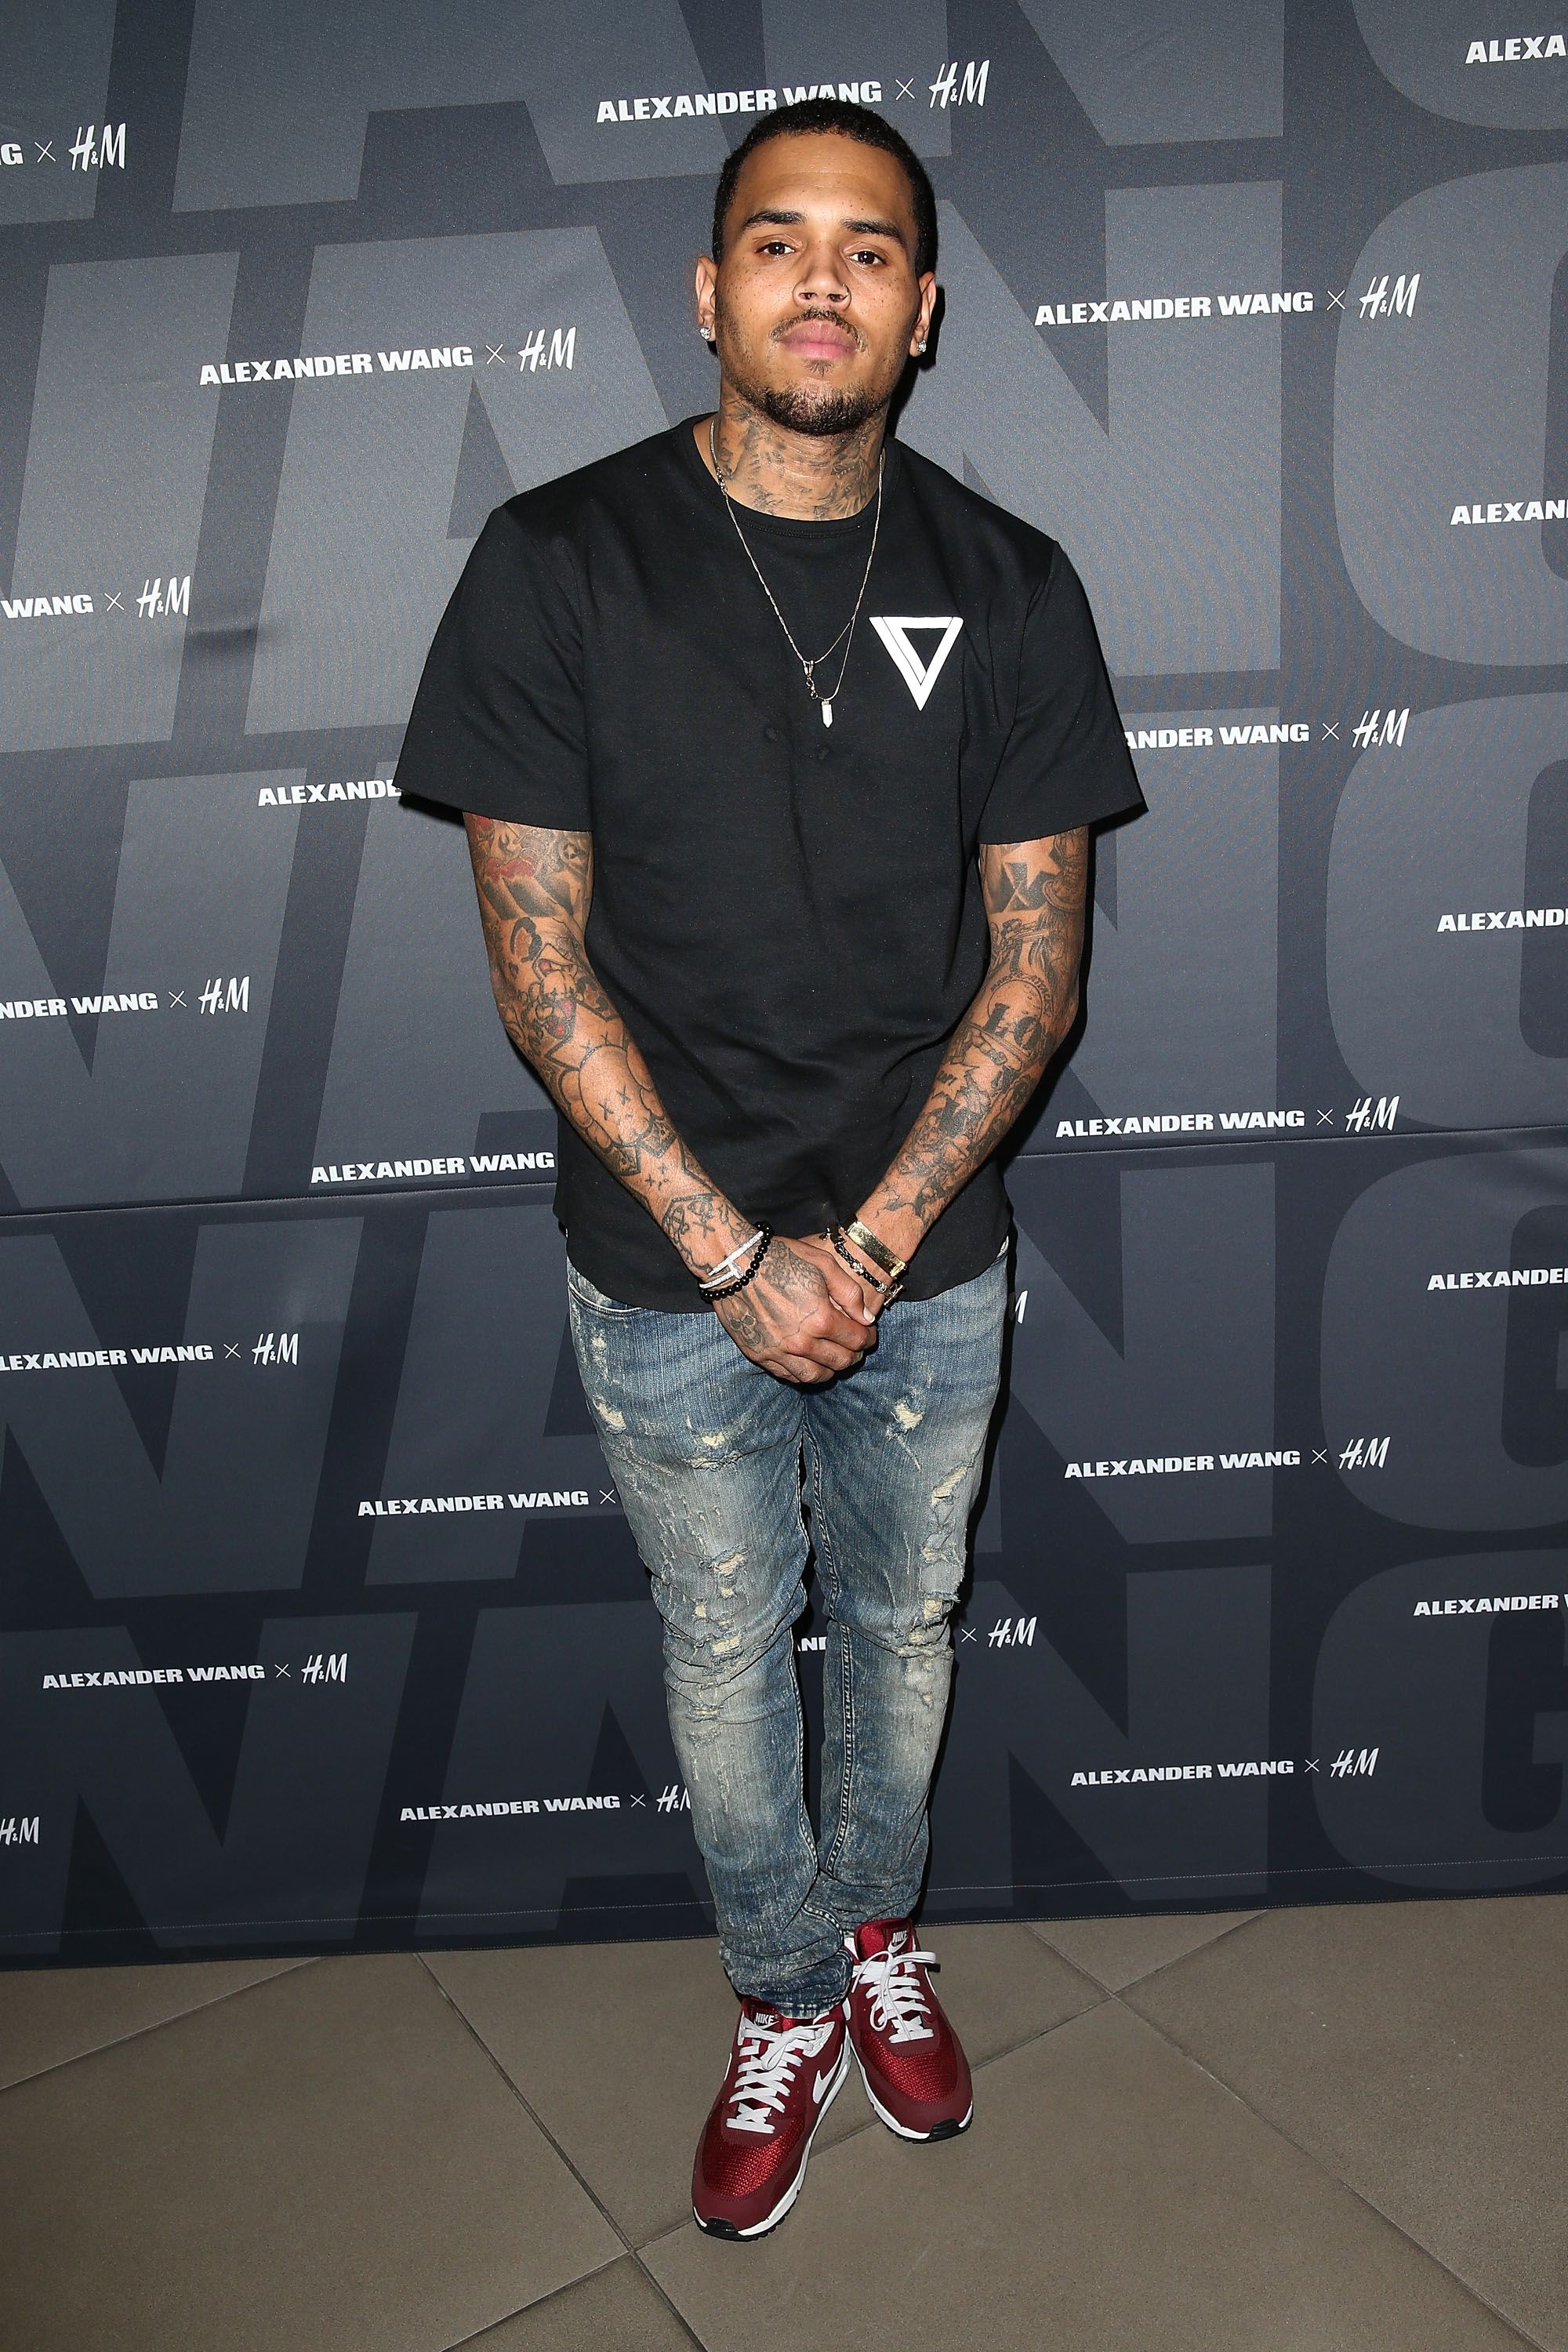 Chris Brown at the Alexander Wang x H&M Pre-Shop Party on November 5, 2014 in California. | Photo: Getty Images